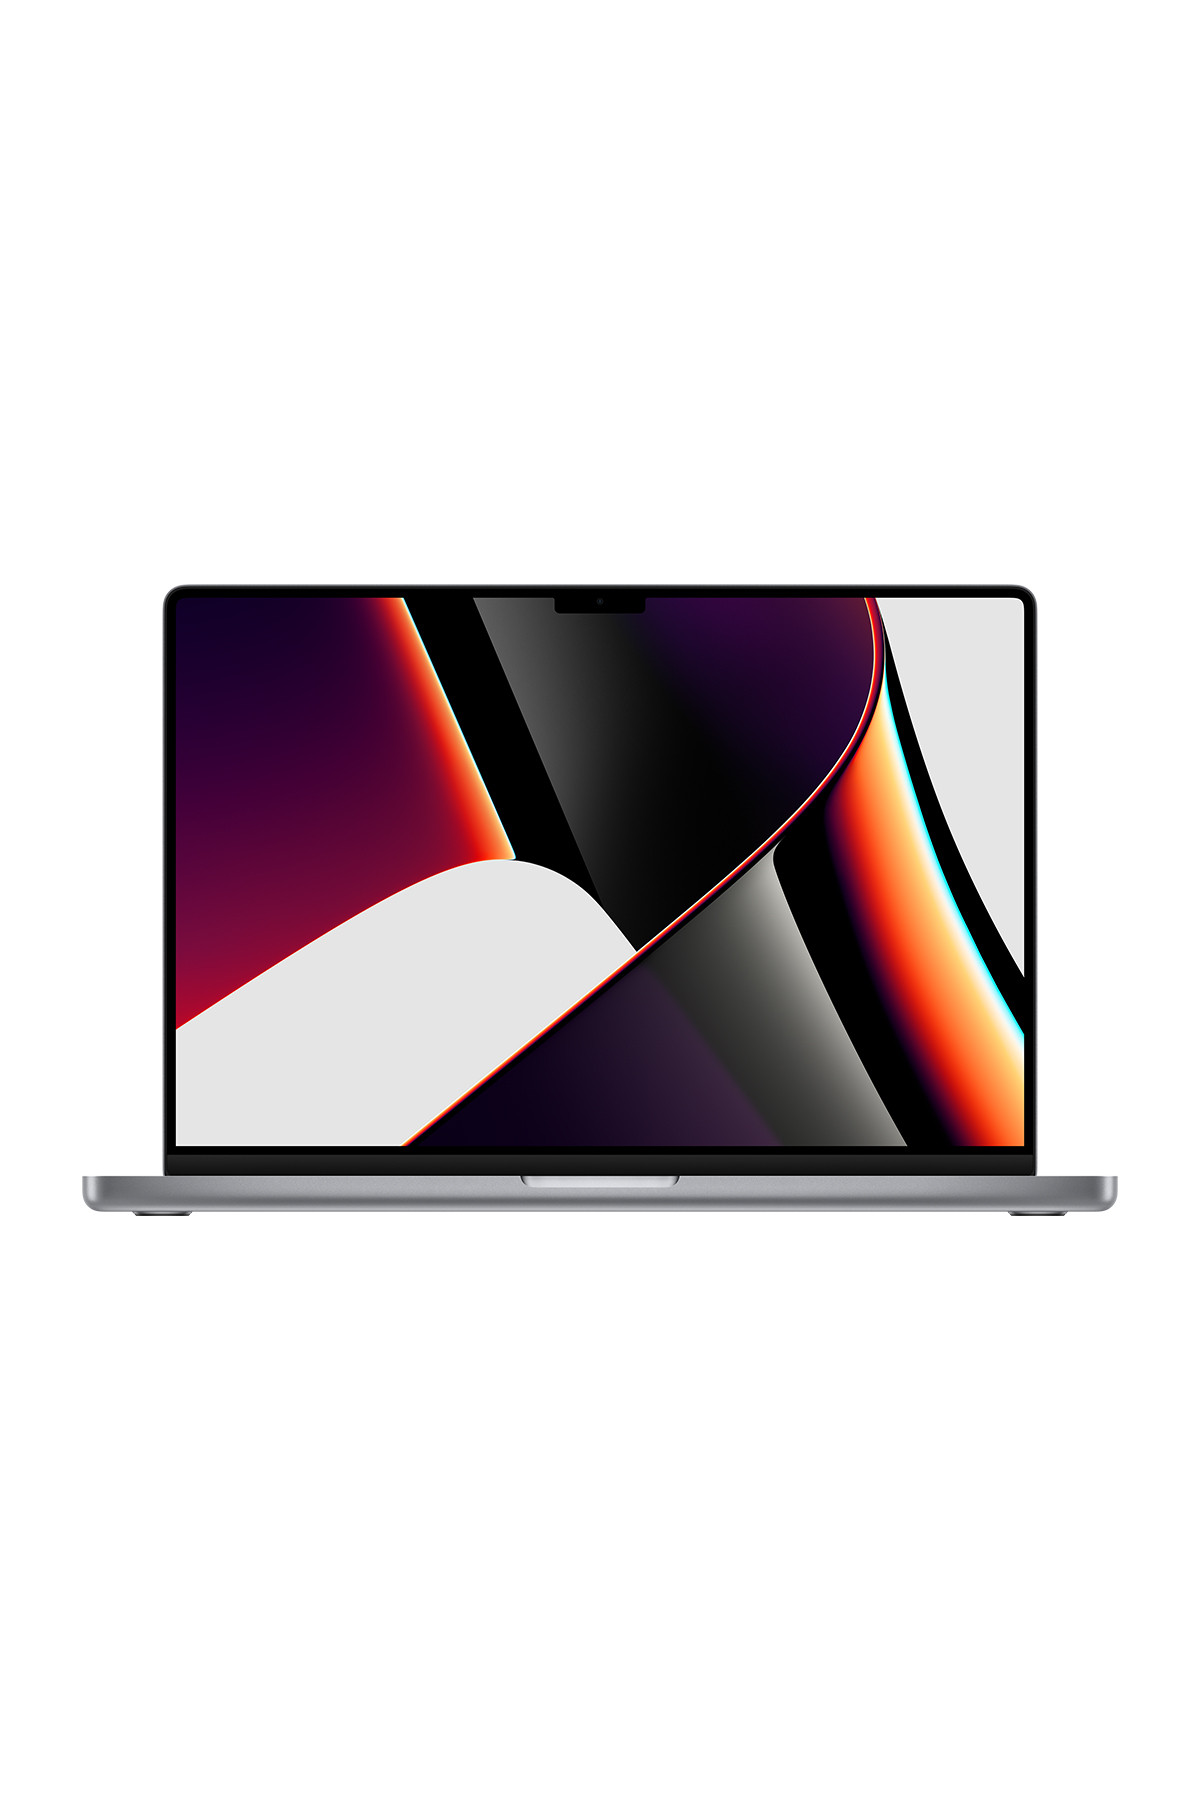 MacBook Pro 16" - Space Grey/Apple M1 Max Chip with 10‑CORE CPU and 32‑CORE GPU/64GB/1TB SSD